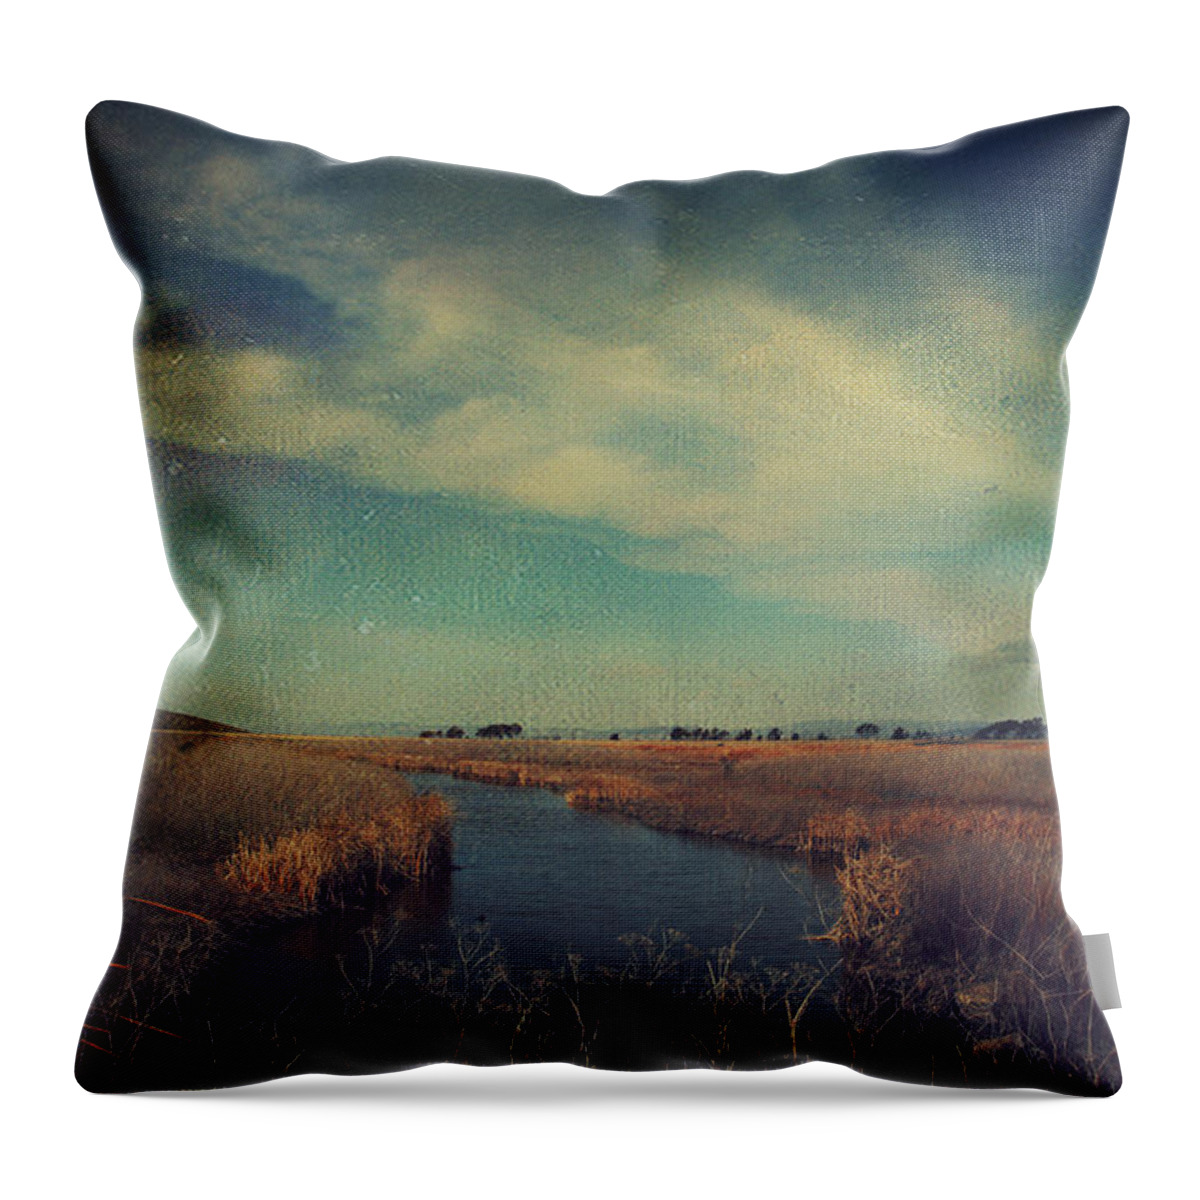 Landscapes Throw Pillow featuring the photograph The Love We Give by Laurie Search